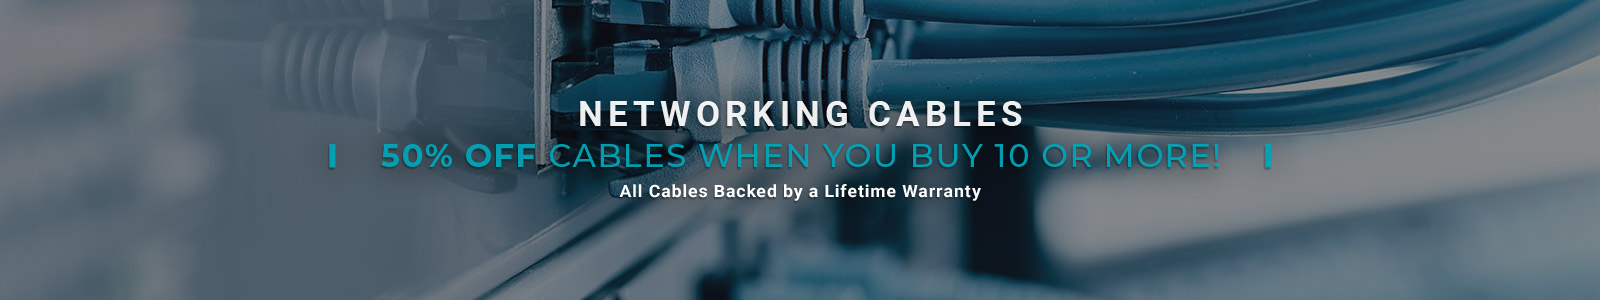 50% OFF
Networking Cables
Backed by a Lifetime Warranty
Shop Now